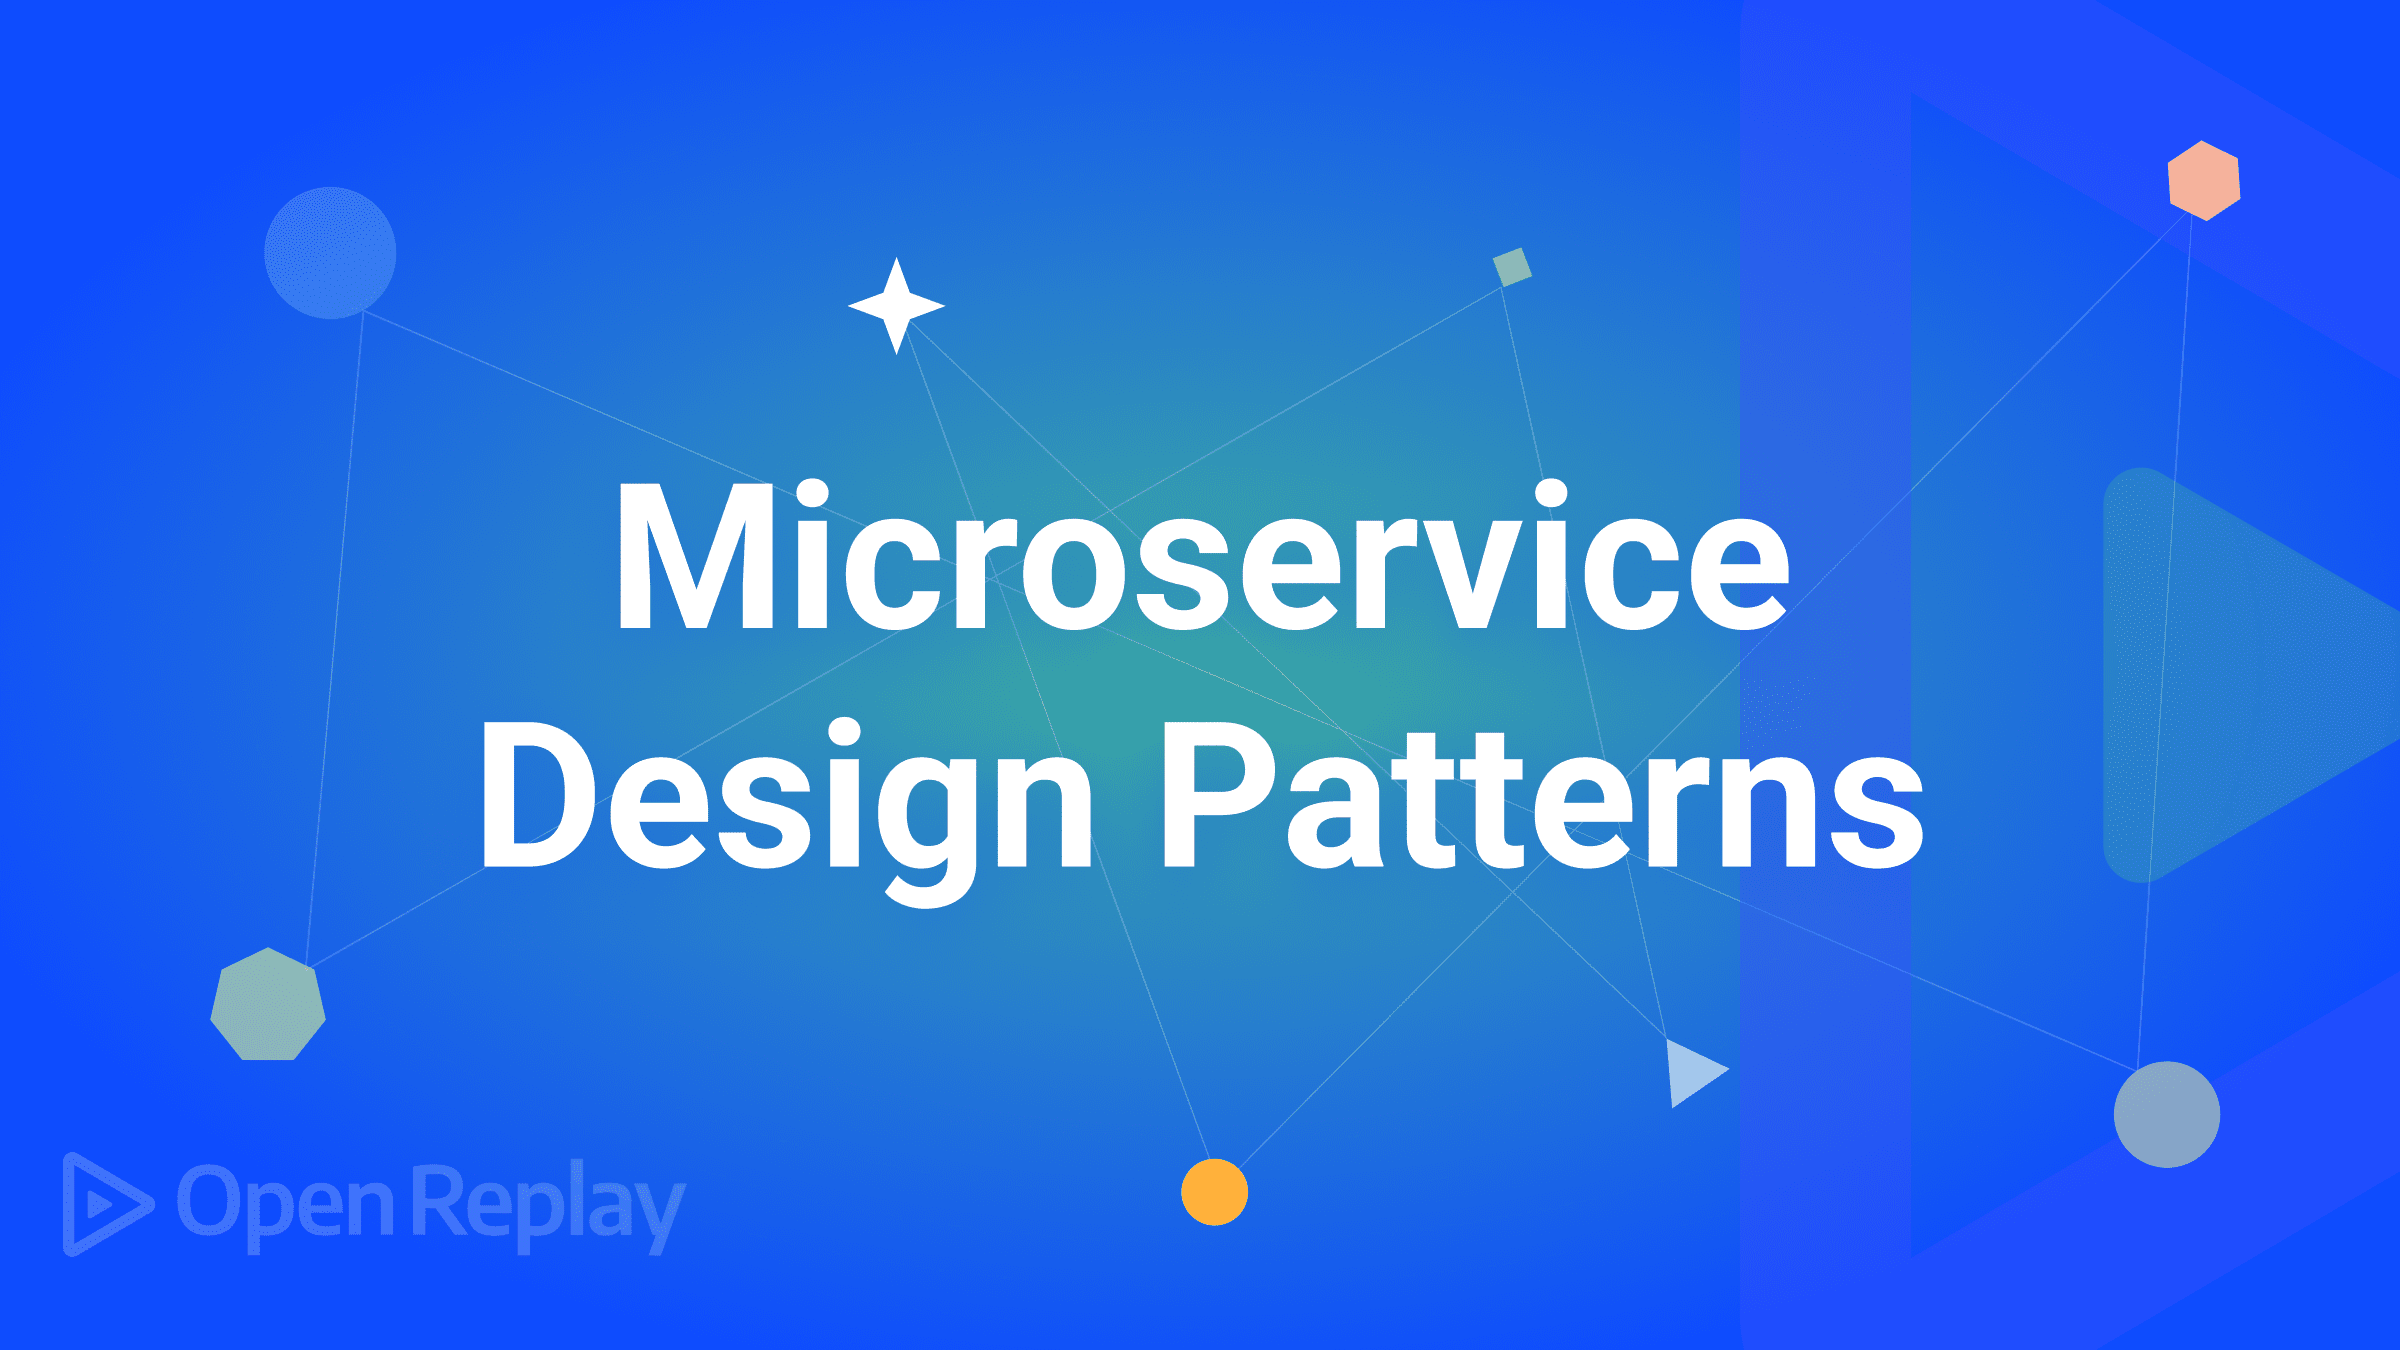 7 Microservice Design Patterns to Use